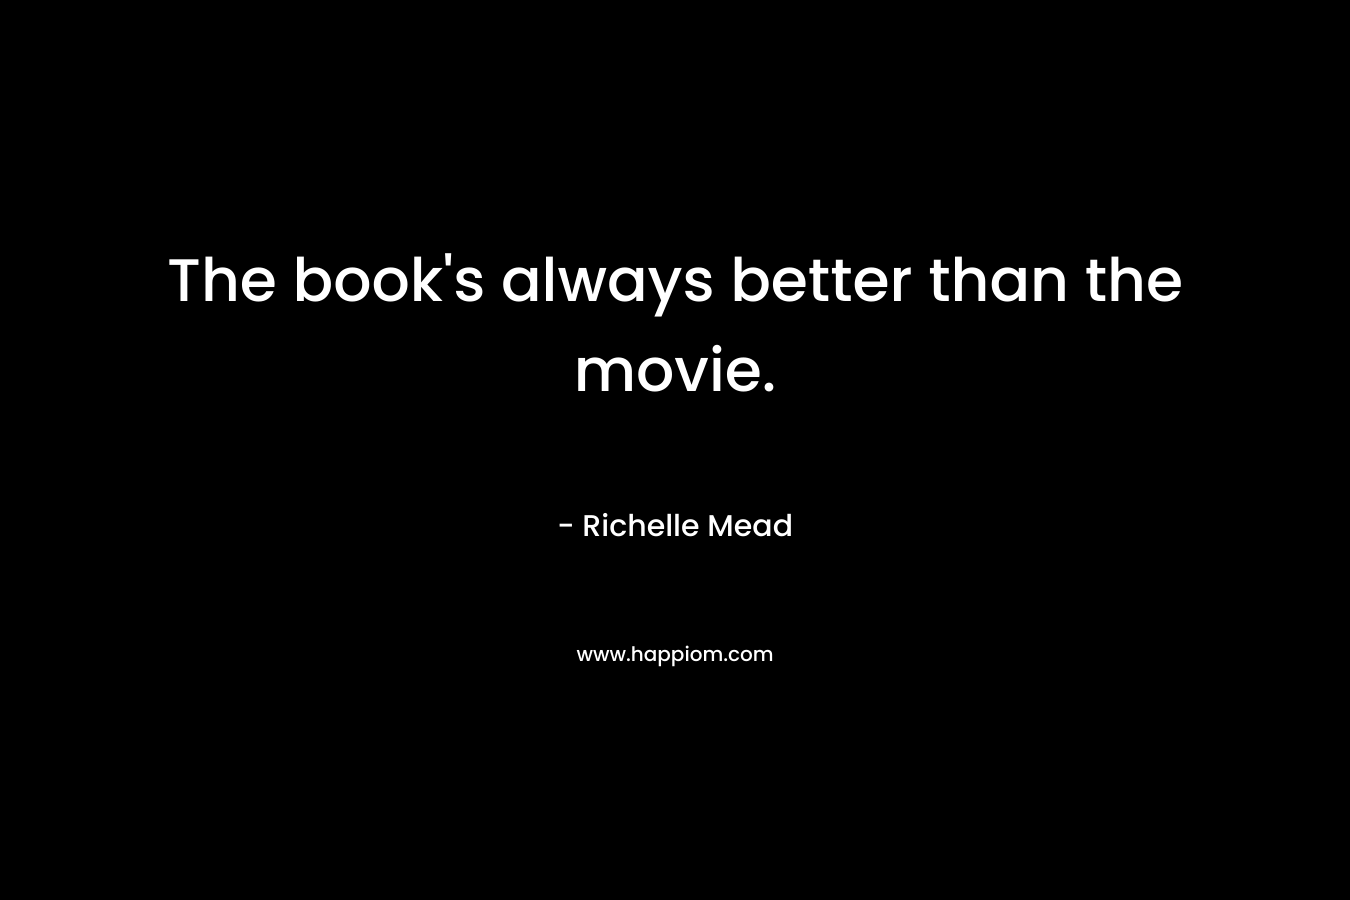 The book's always better than the movie.